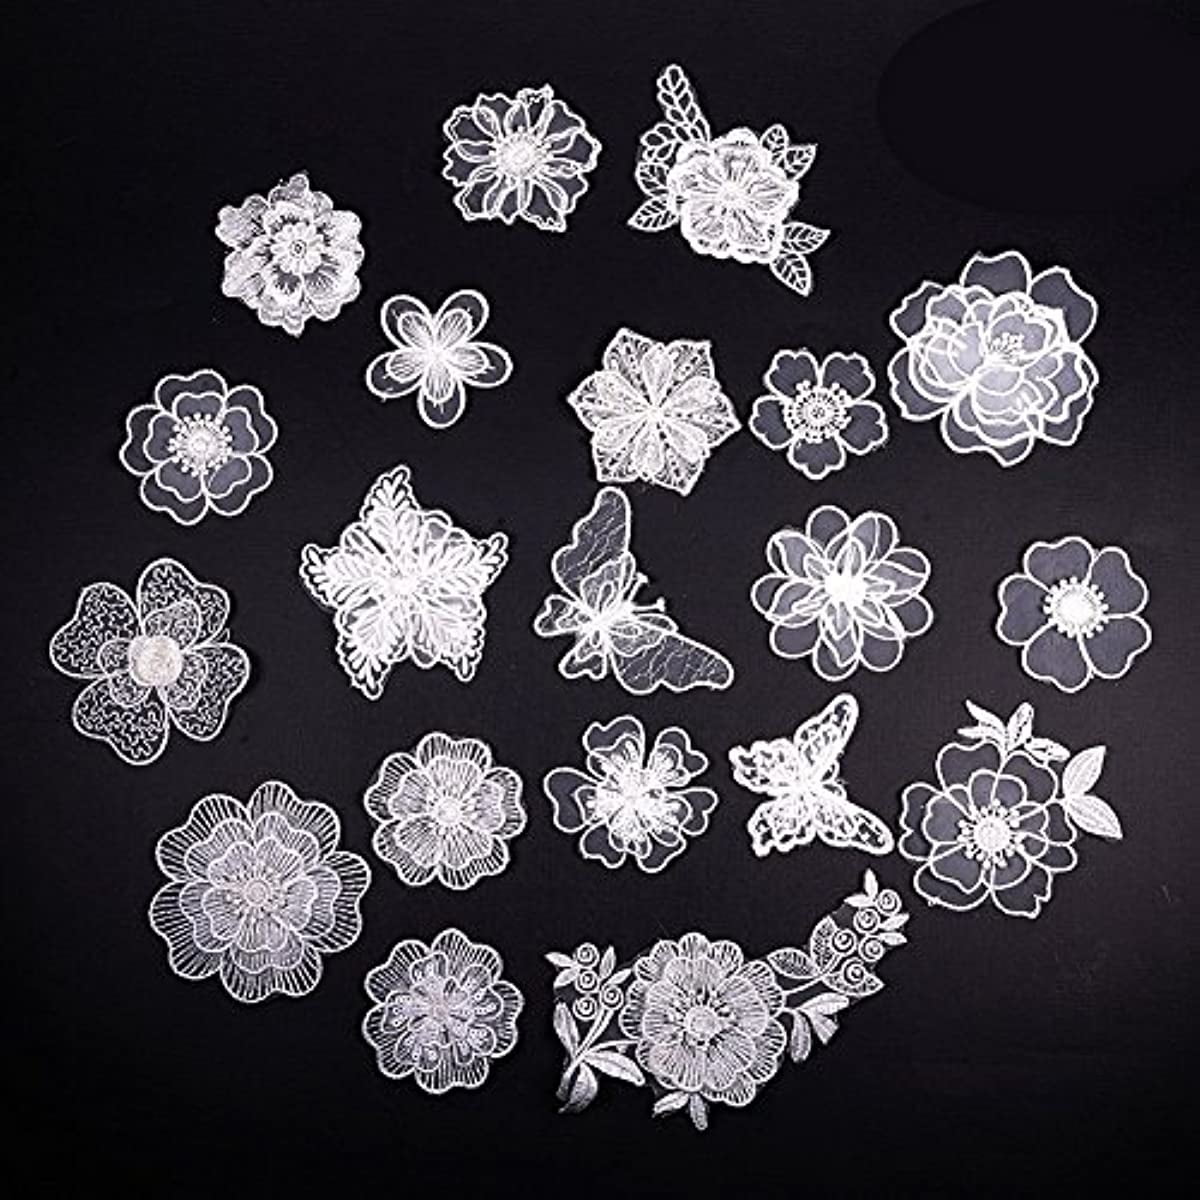  TEHAUX 6pcs Lace Patch Flower Patches Iron on Embroidery Flower  Decor Decor Stick on Patches Flower Iron on DIY Iron on Patches Floral  Decor Cloth White Large Backpack Bride